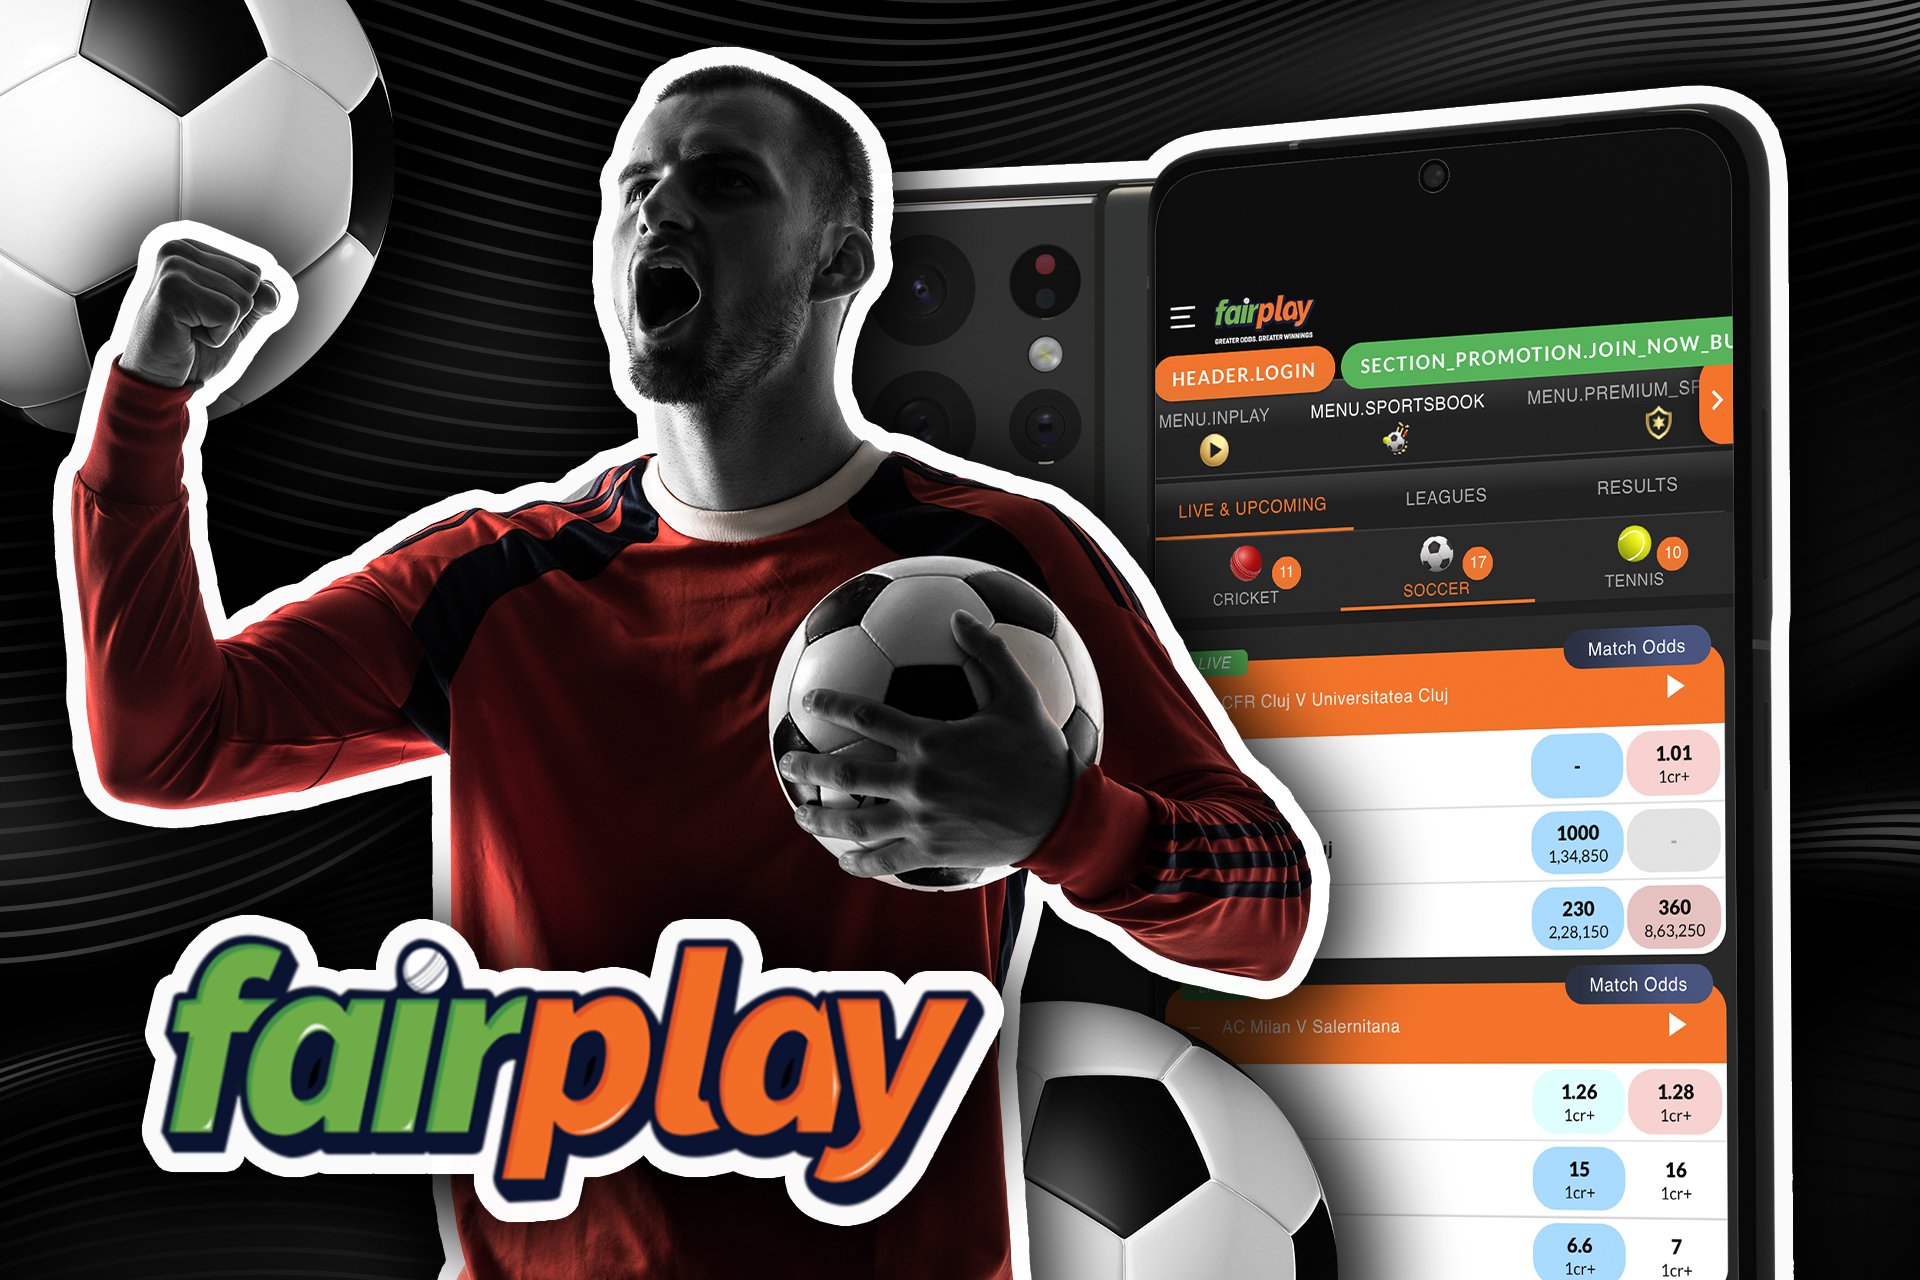 Download the Fairplay mobile app to place bets on soccer via your smartphone.